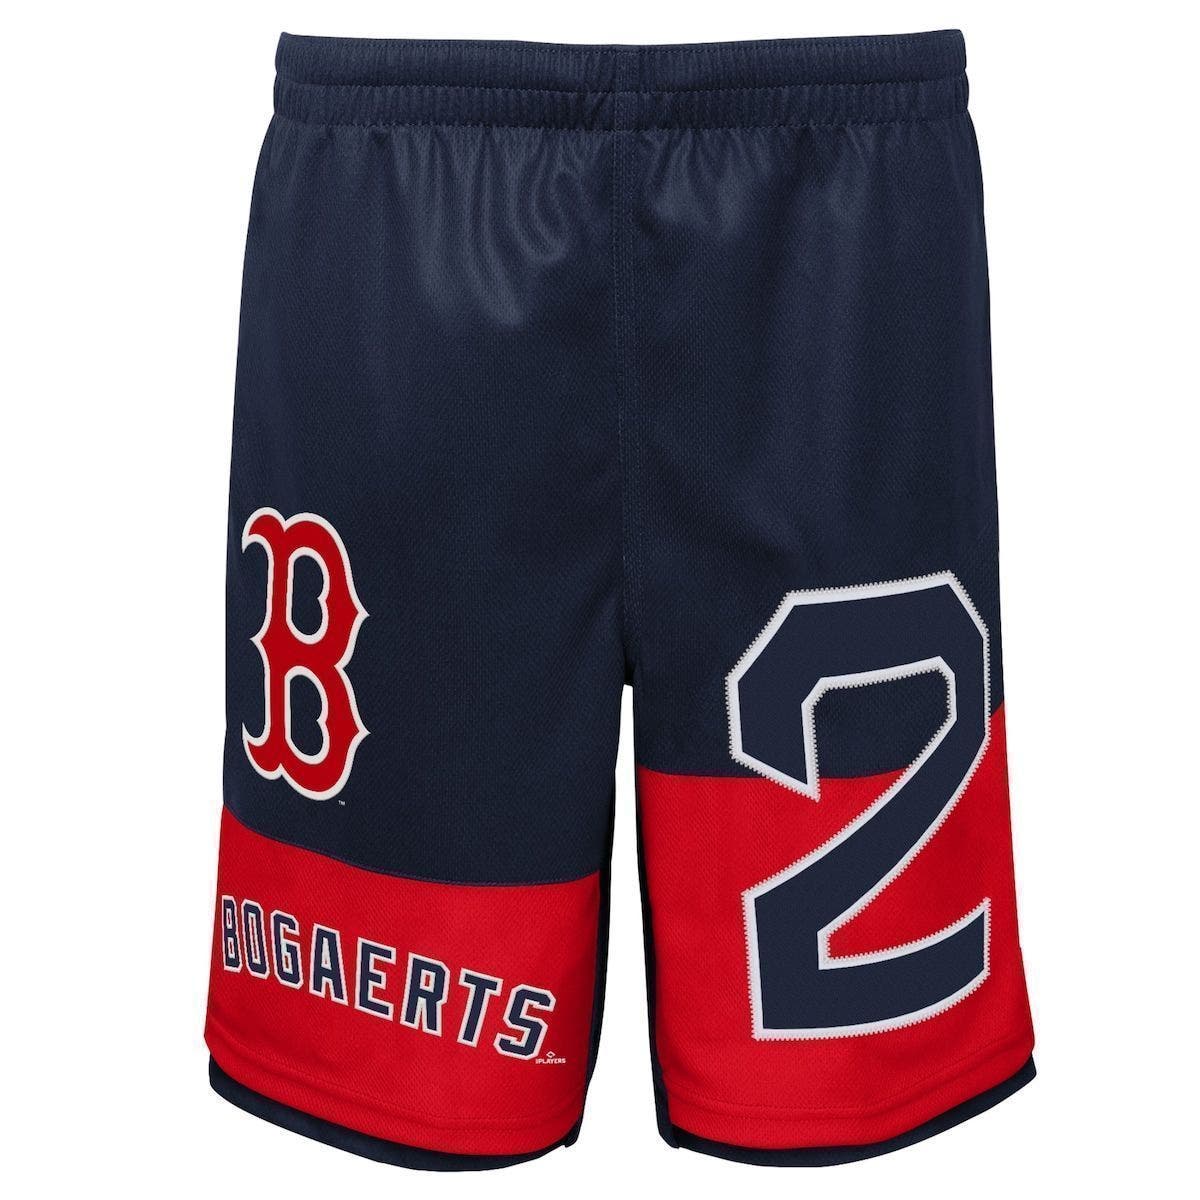 Outerstuff Boston Red Sox Athletic Stretch Waist Dri Fit Boys Shorts 